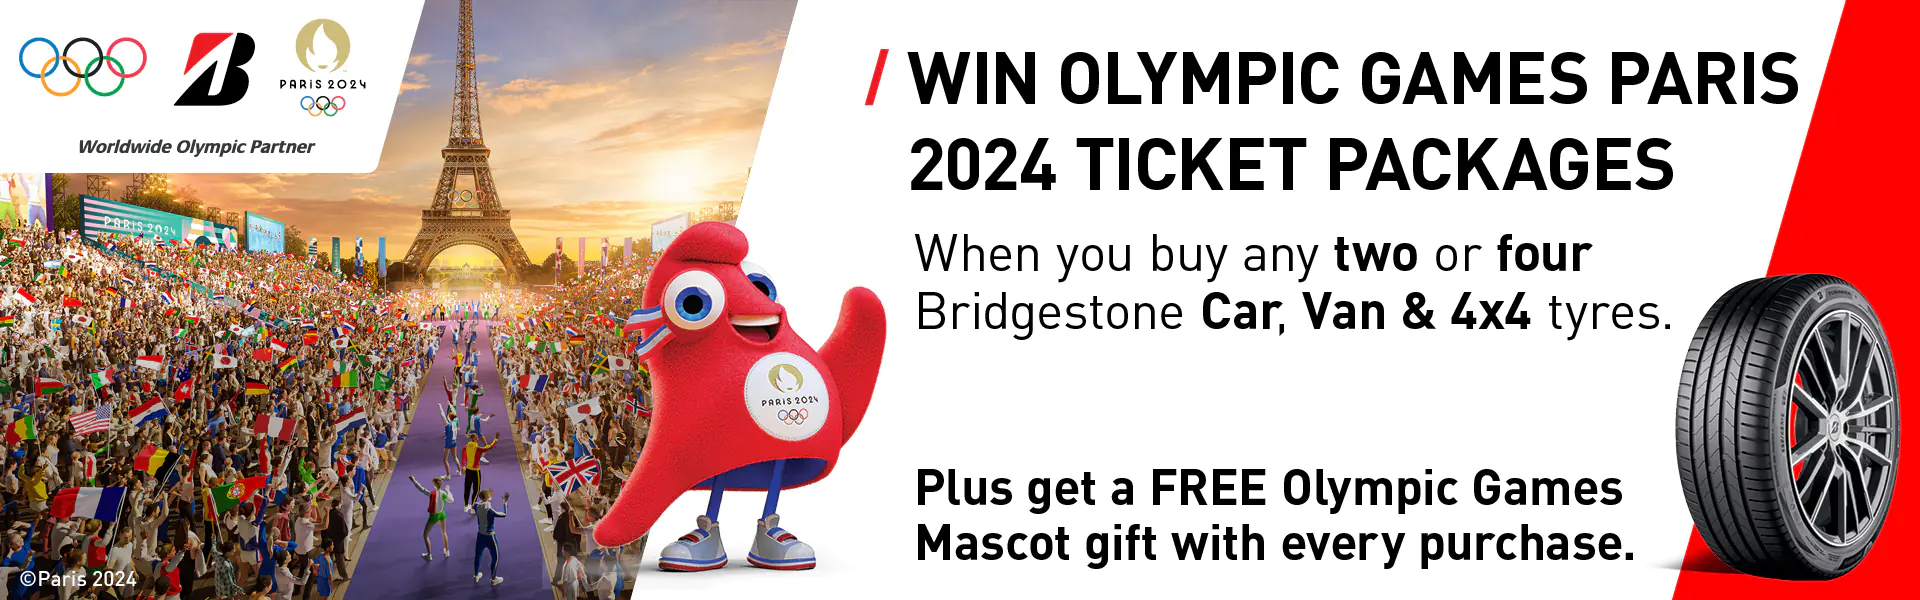 WIN OLYMPIC GAMES PARIS 2024 TICKET PACKAGE